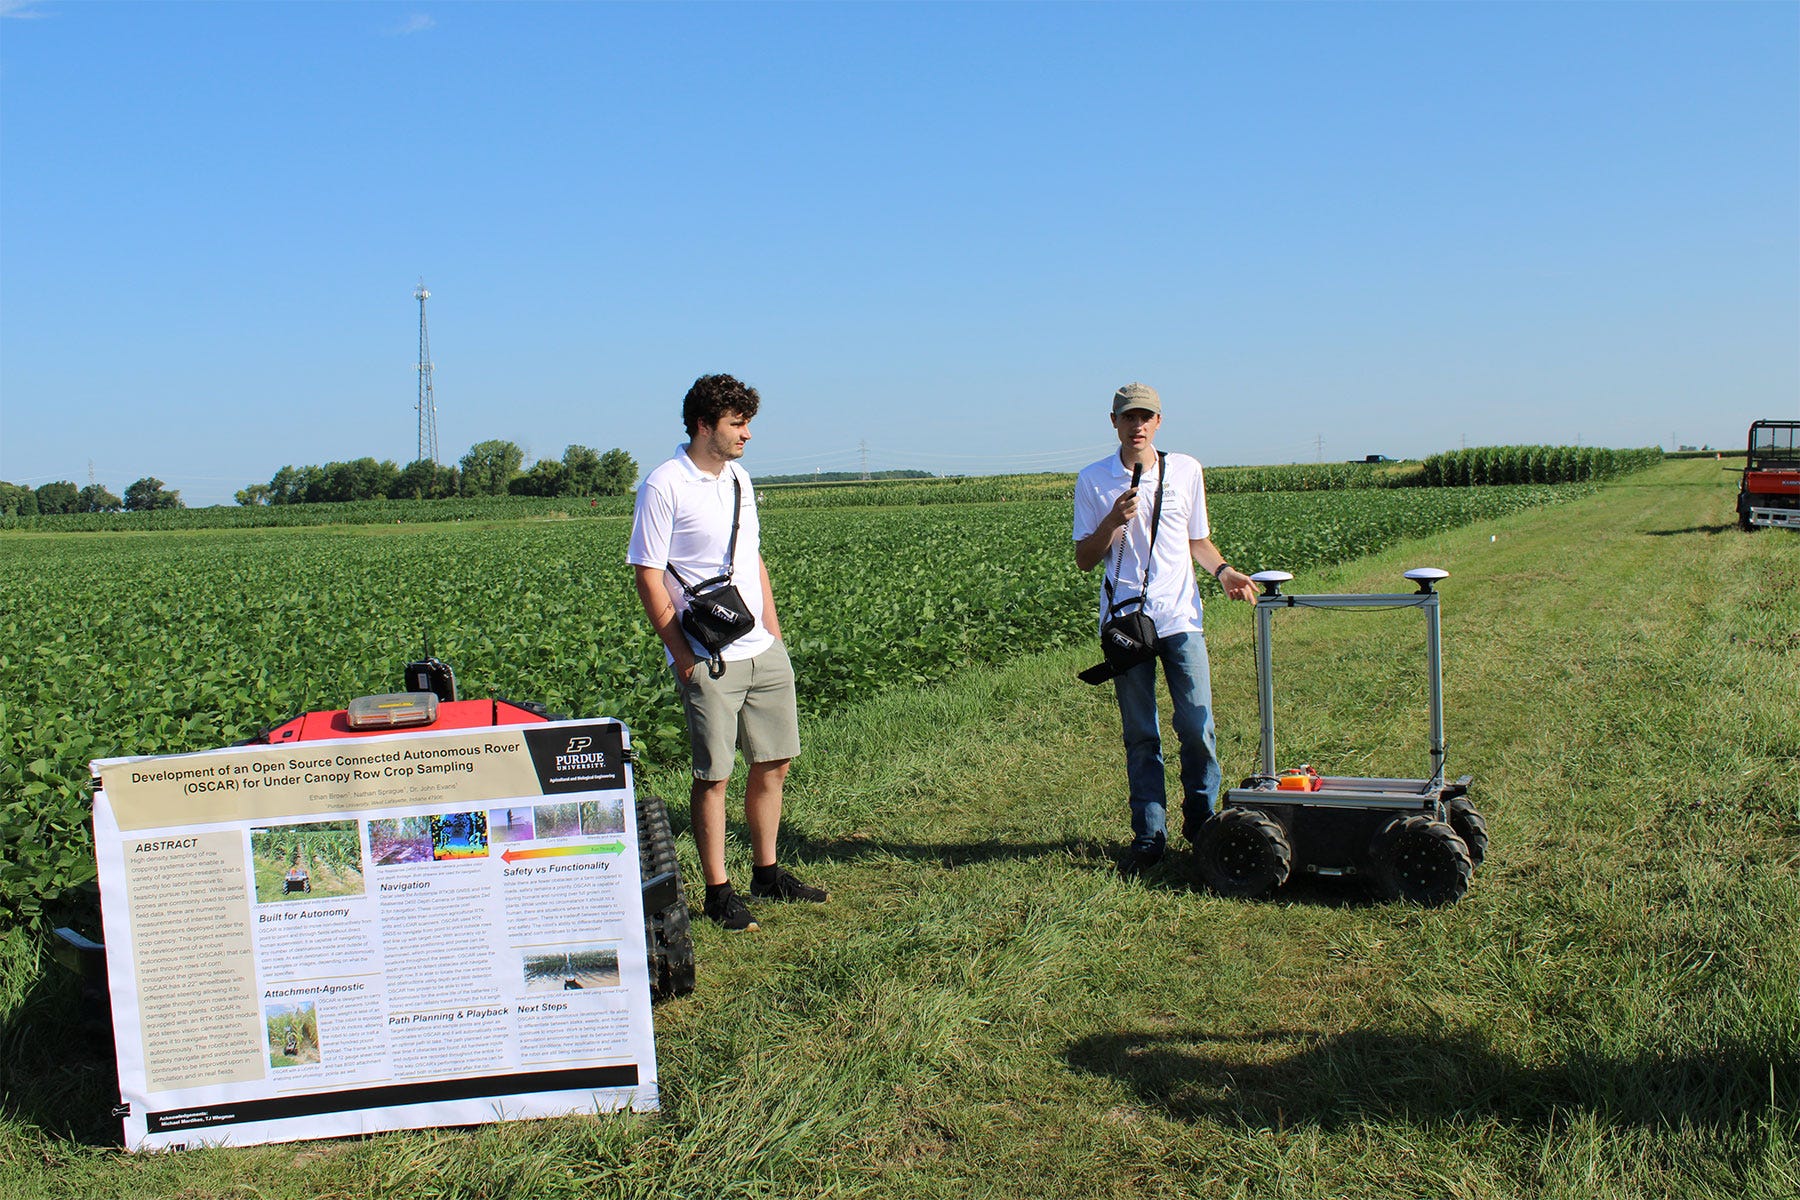 2 college students give a presentation with a robot in front of a soybean field